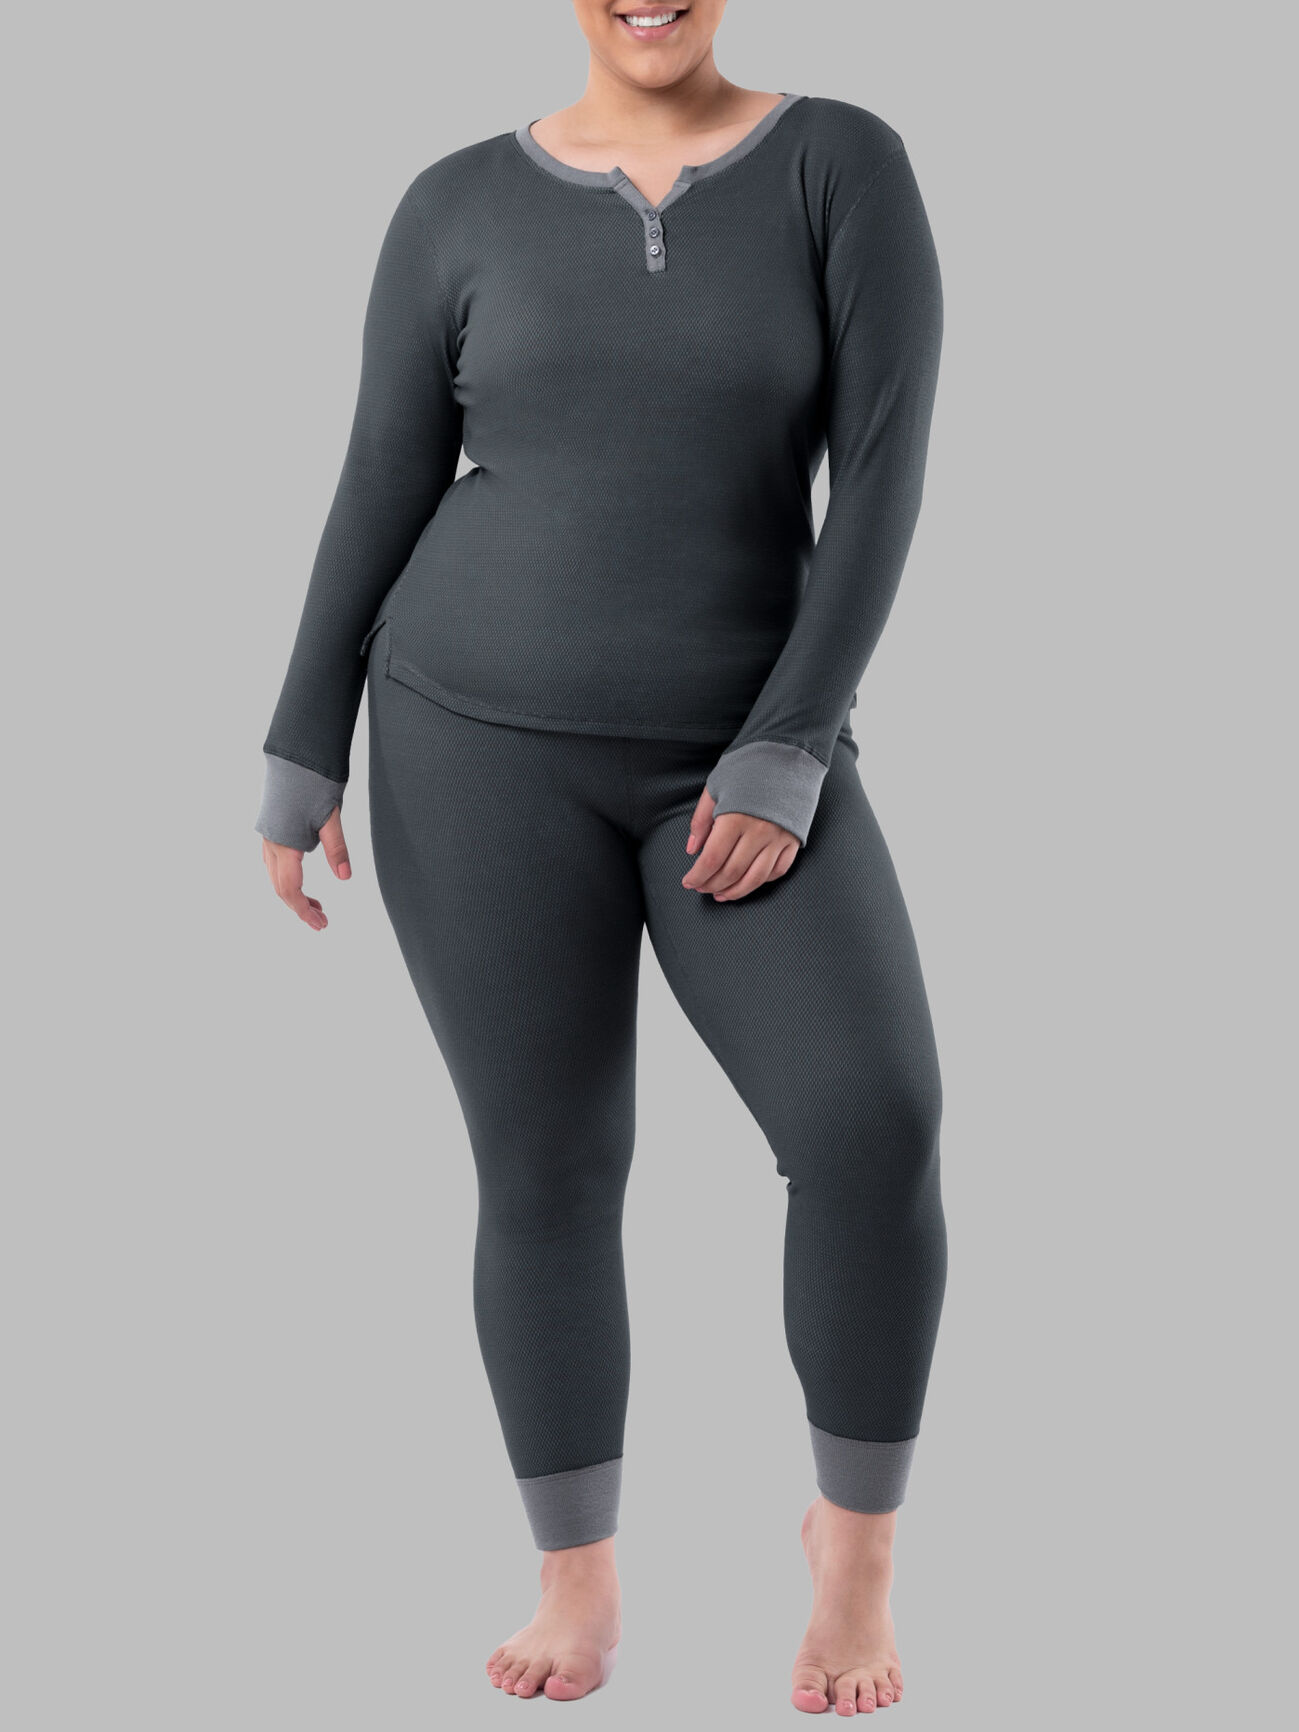 Thermal Underwear Set Fleece Thick Keep Warm Men and Women Long Johns  Couples Suit Large Size